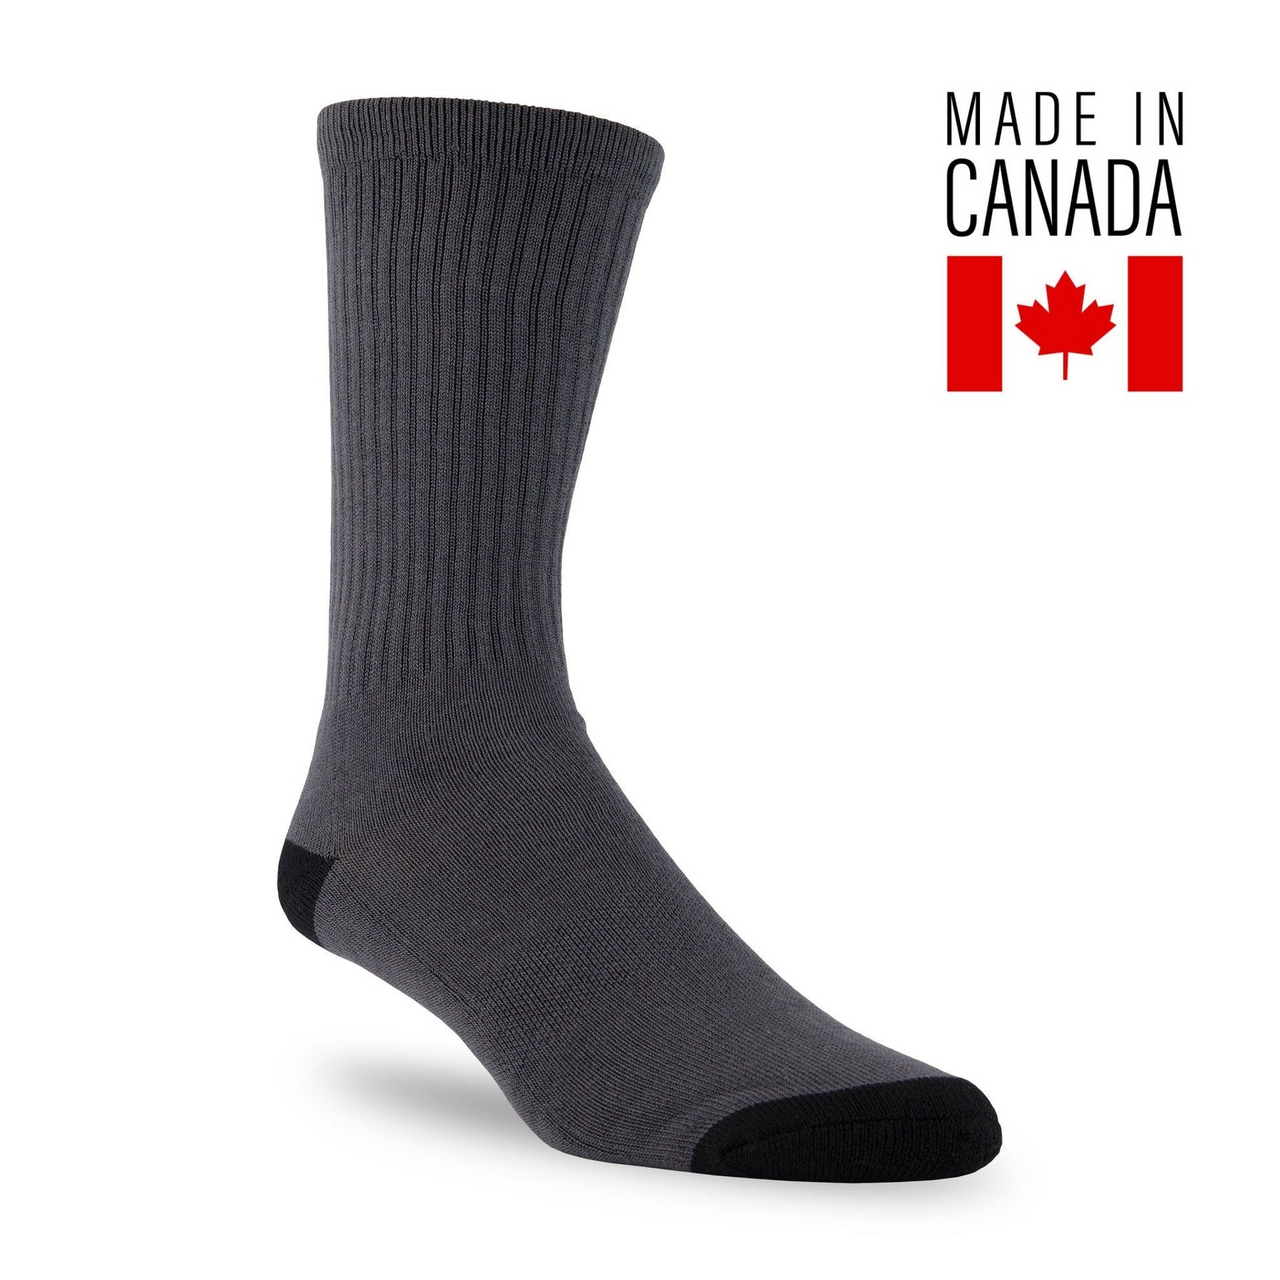 The Great Canadian Sox J.B. Field's Athletic "Bamboo Sport Crew" Socks